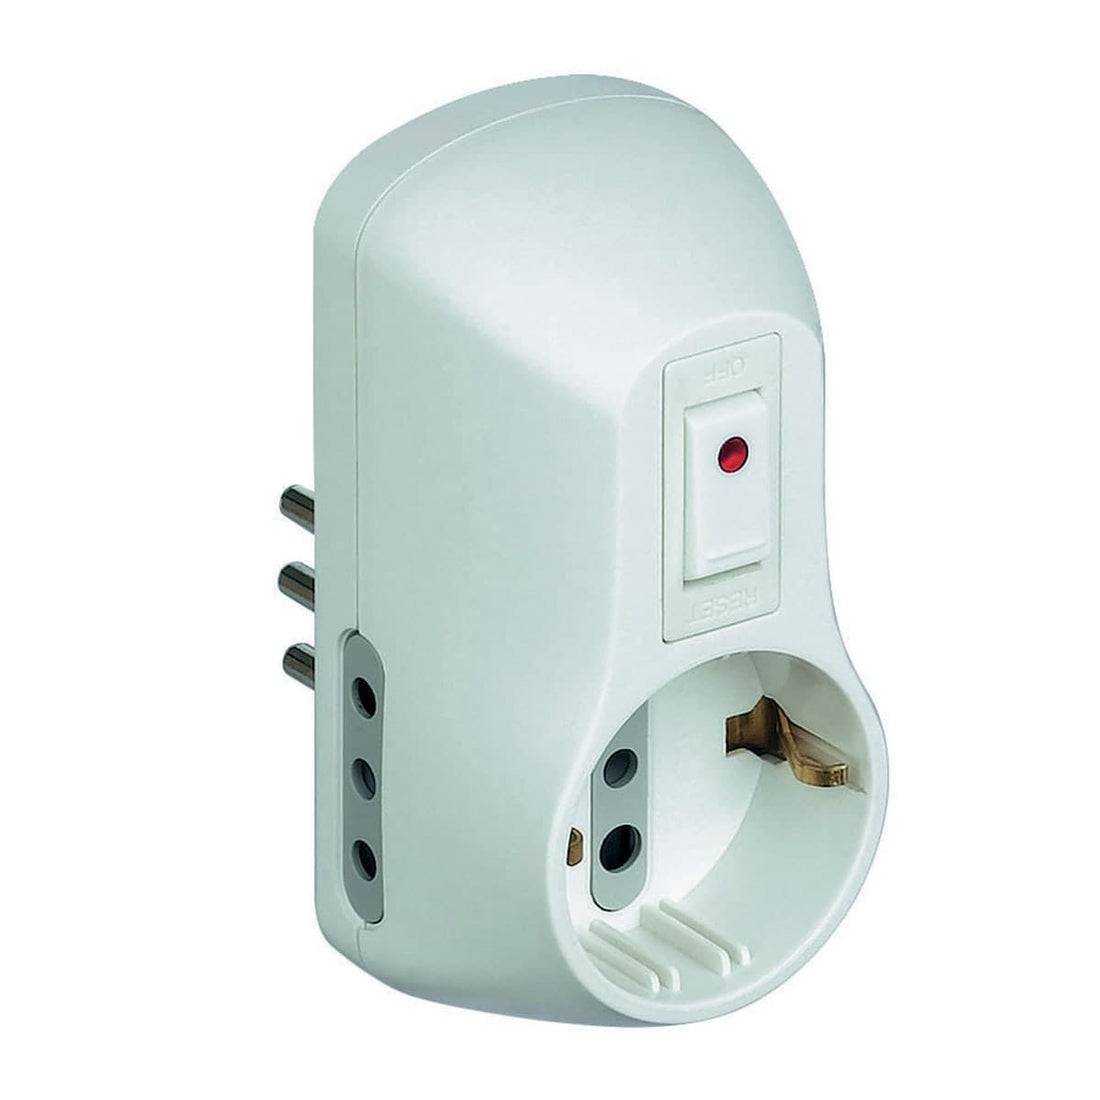 ADAPTER PLUG 10A 3 PLACES 2 SOCKETS 10A 1 UNIVERSAL WITH SWITCH WHITE - best price from Maltashopper.com BR420000906